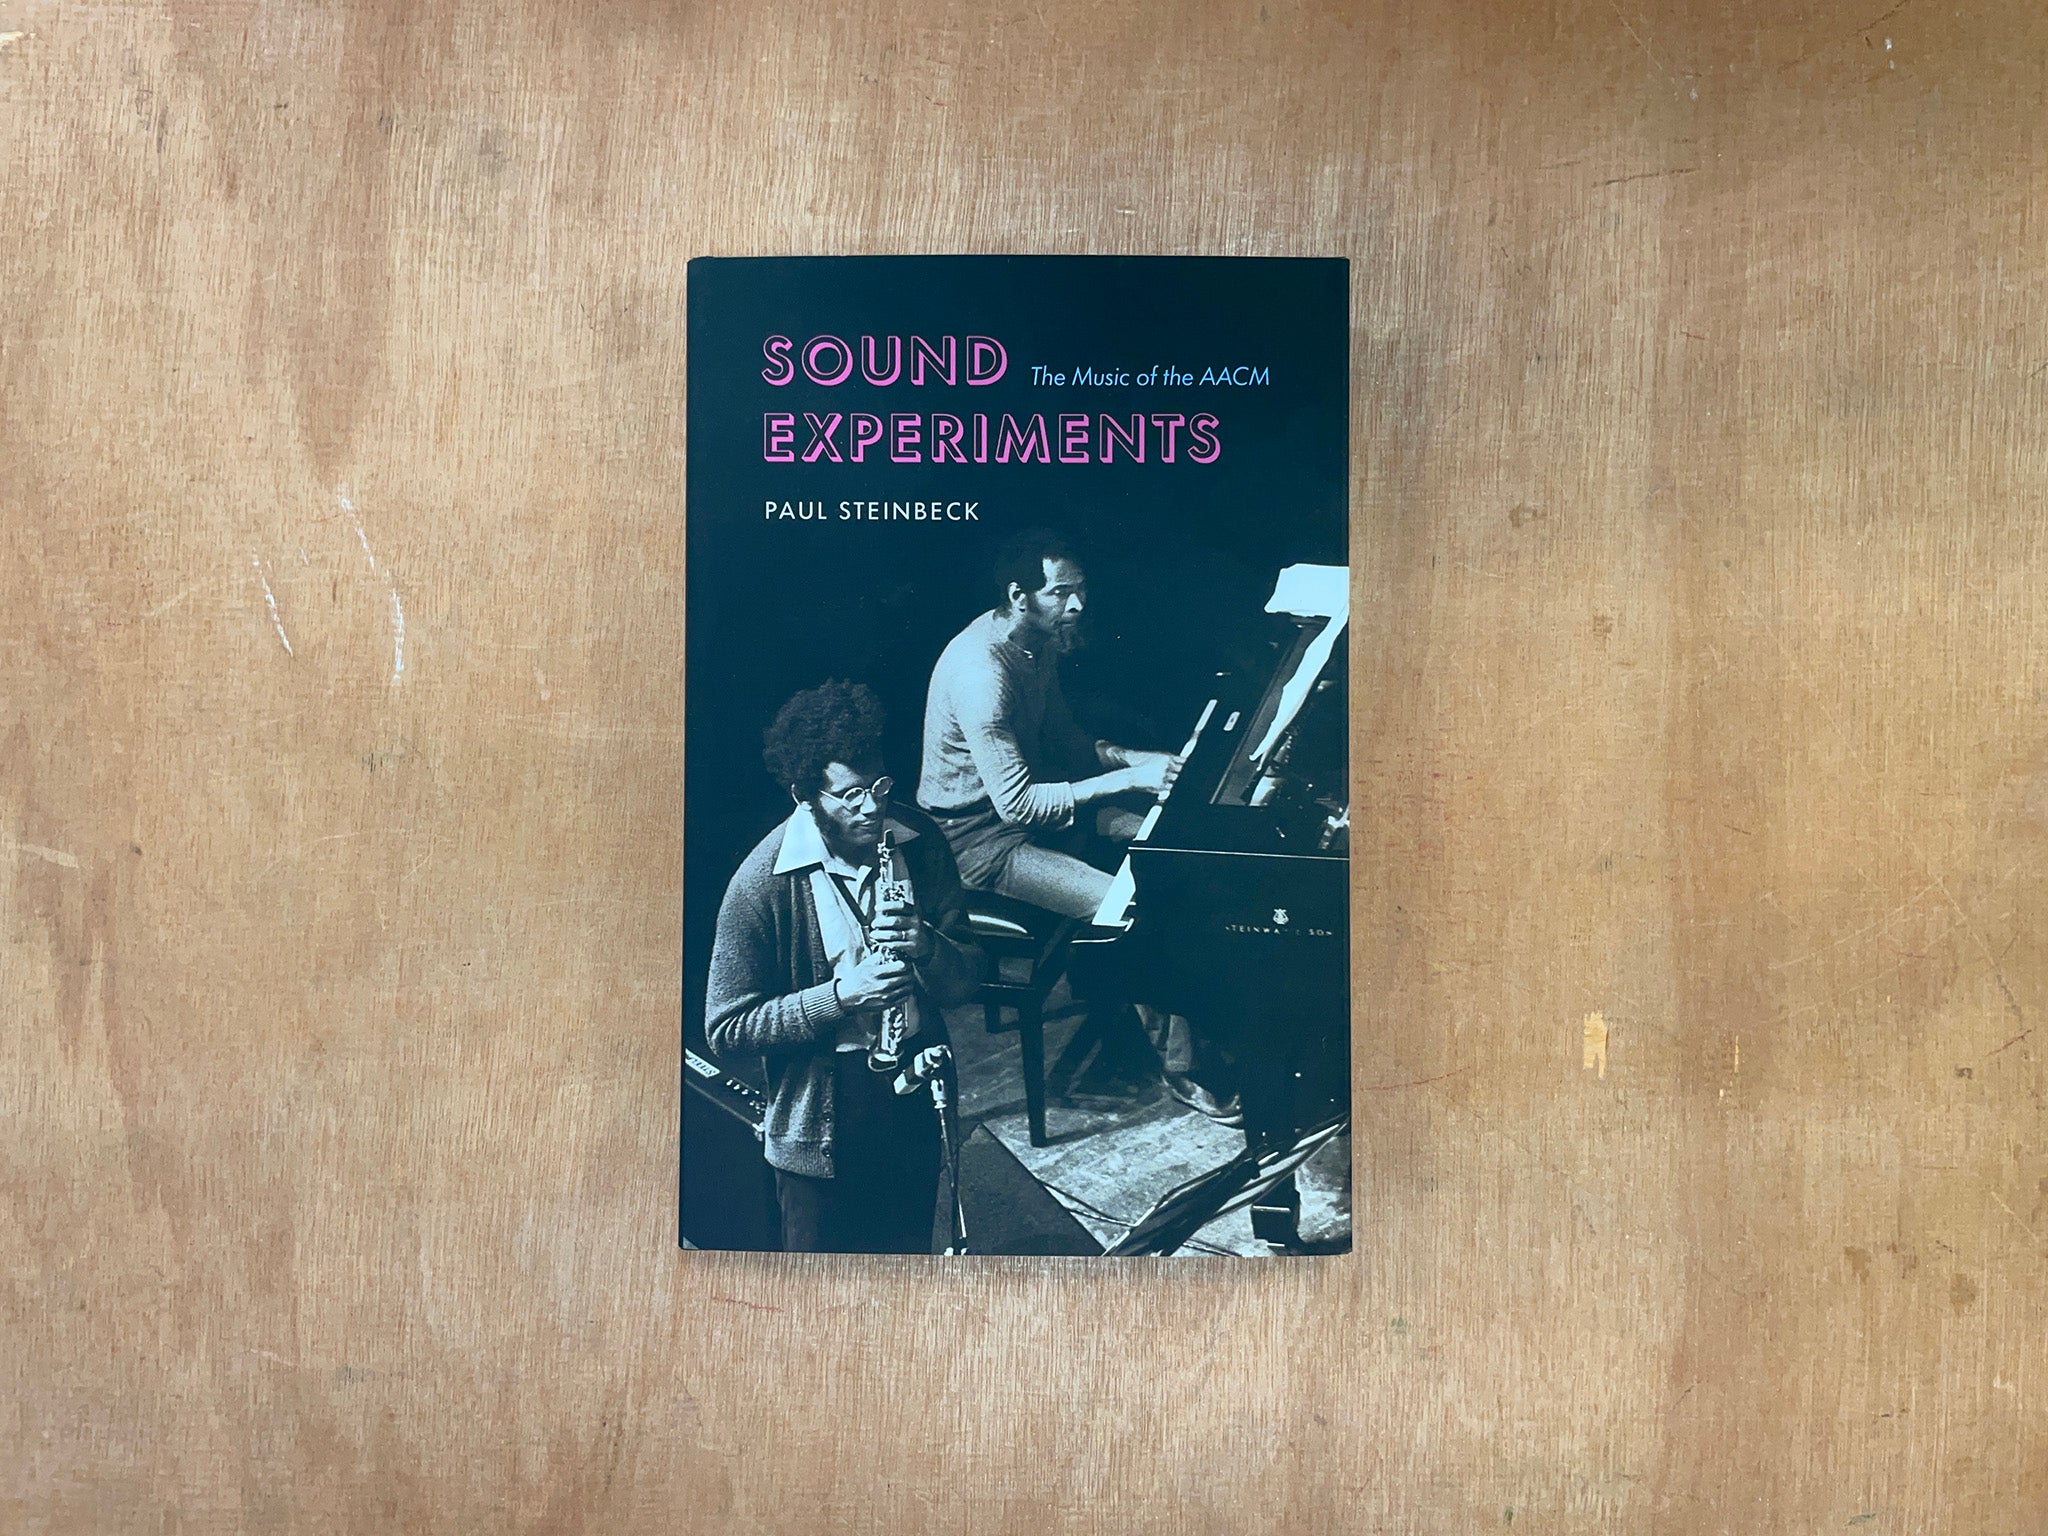 SOUND EXPERIMENTS: THE MUSIC OF THE AACM by Paul Steinbeck